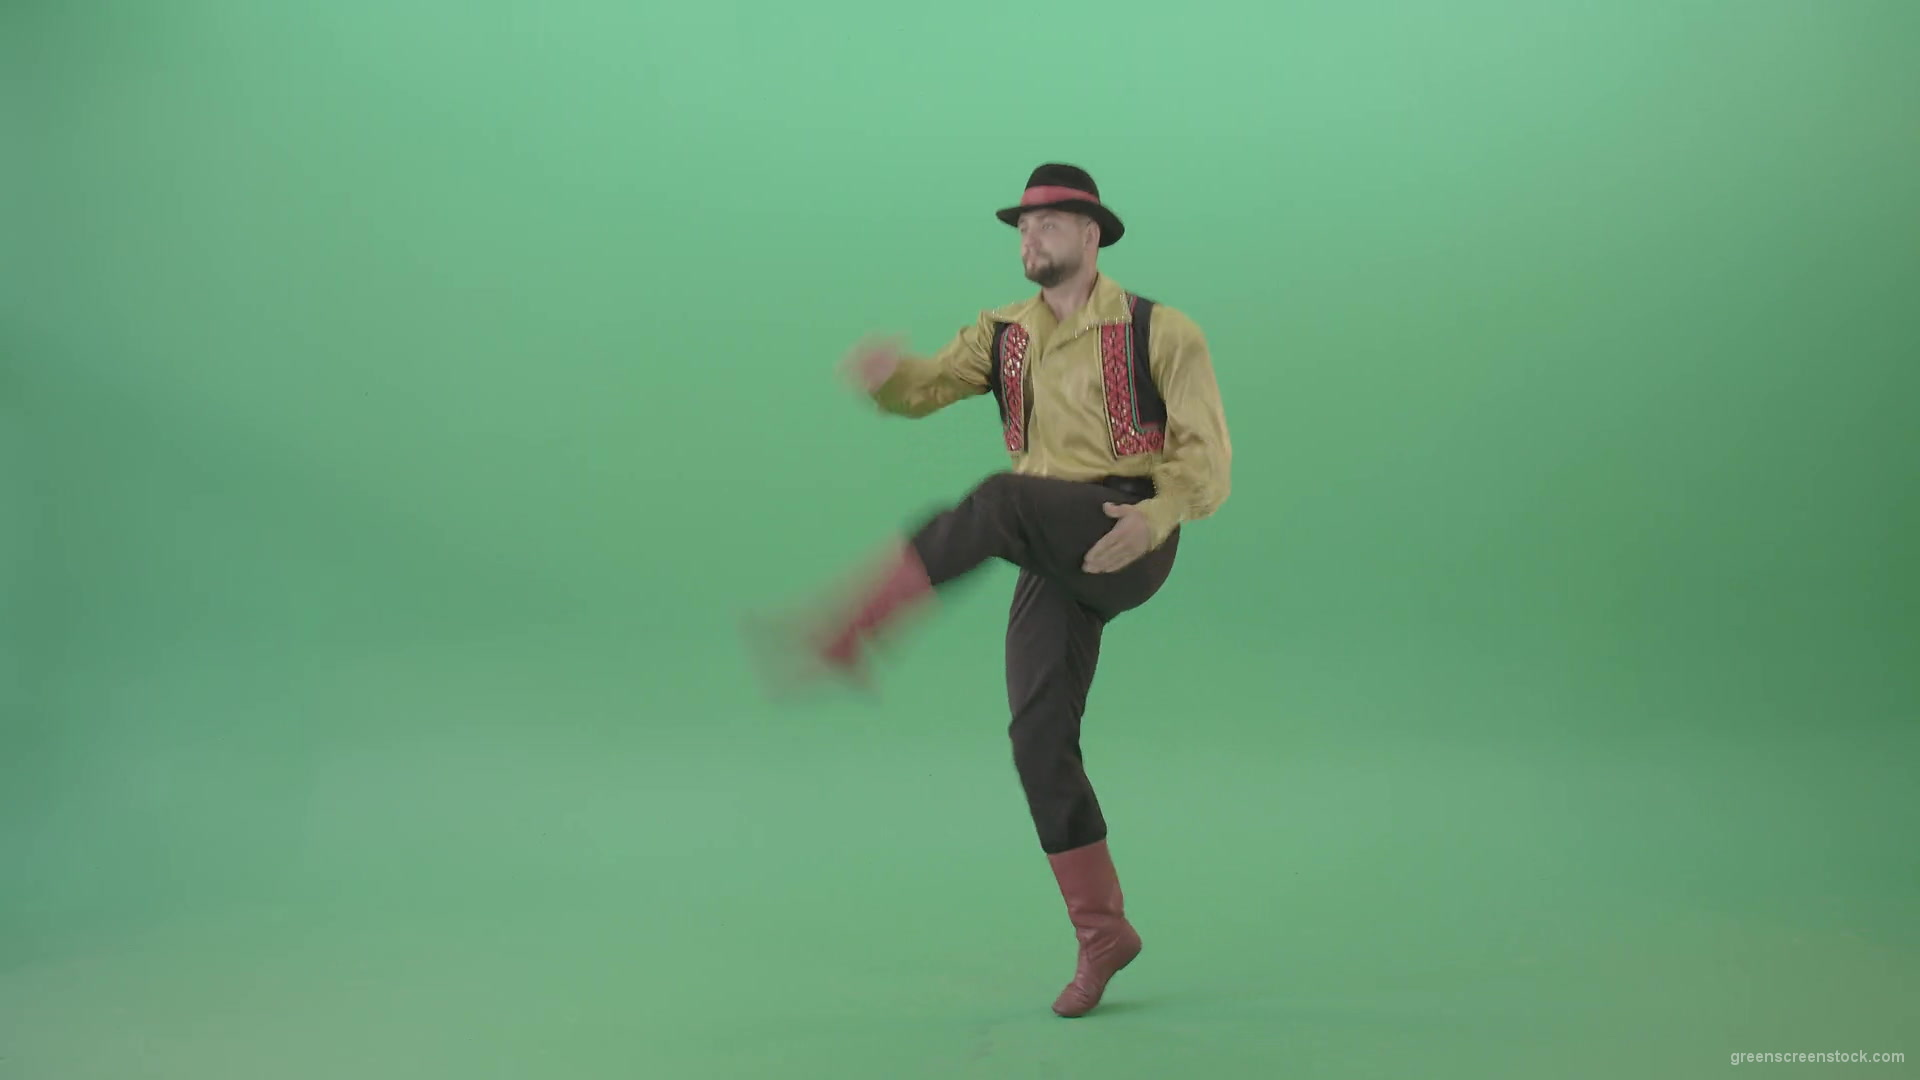 Balcan-gipsy-man-dancer-showing-clapping-moves-isolated-on-green-screen-4K-Video-Footage-1920_002 Green Screen Stock